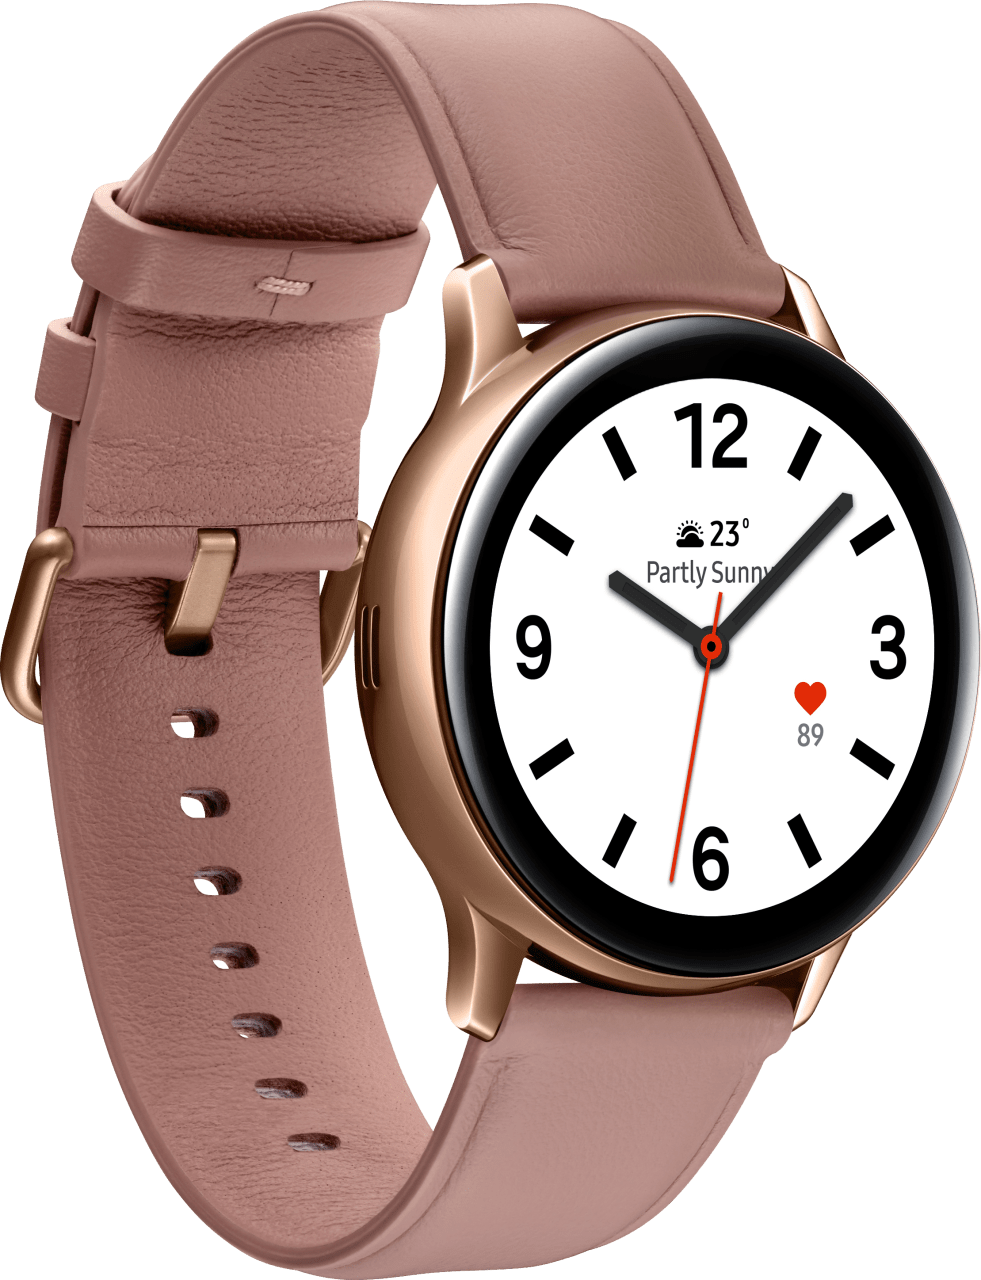 Gold Samsung Galaxy Watch Active2 (LTE), 40mm Stainless steel case, Leather band.2